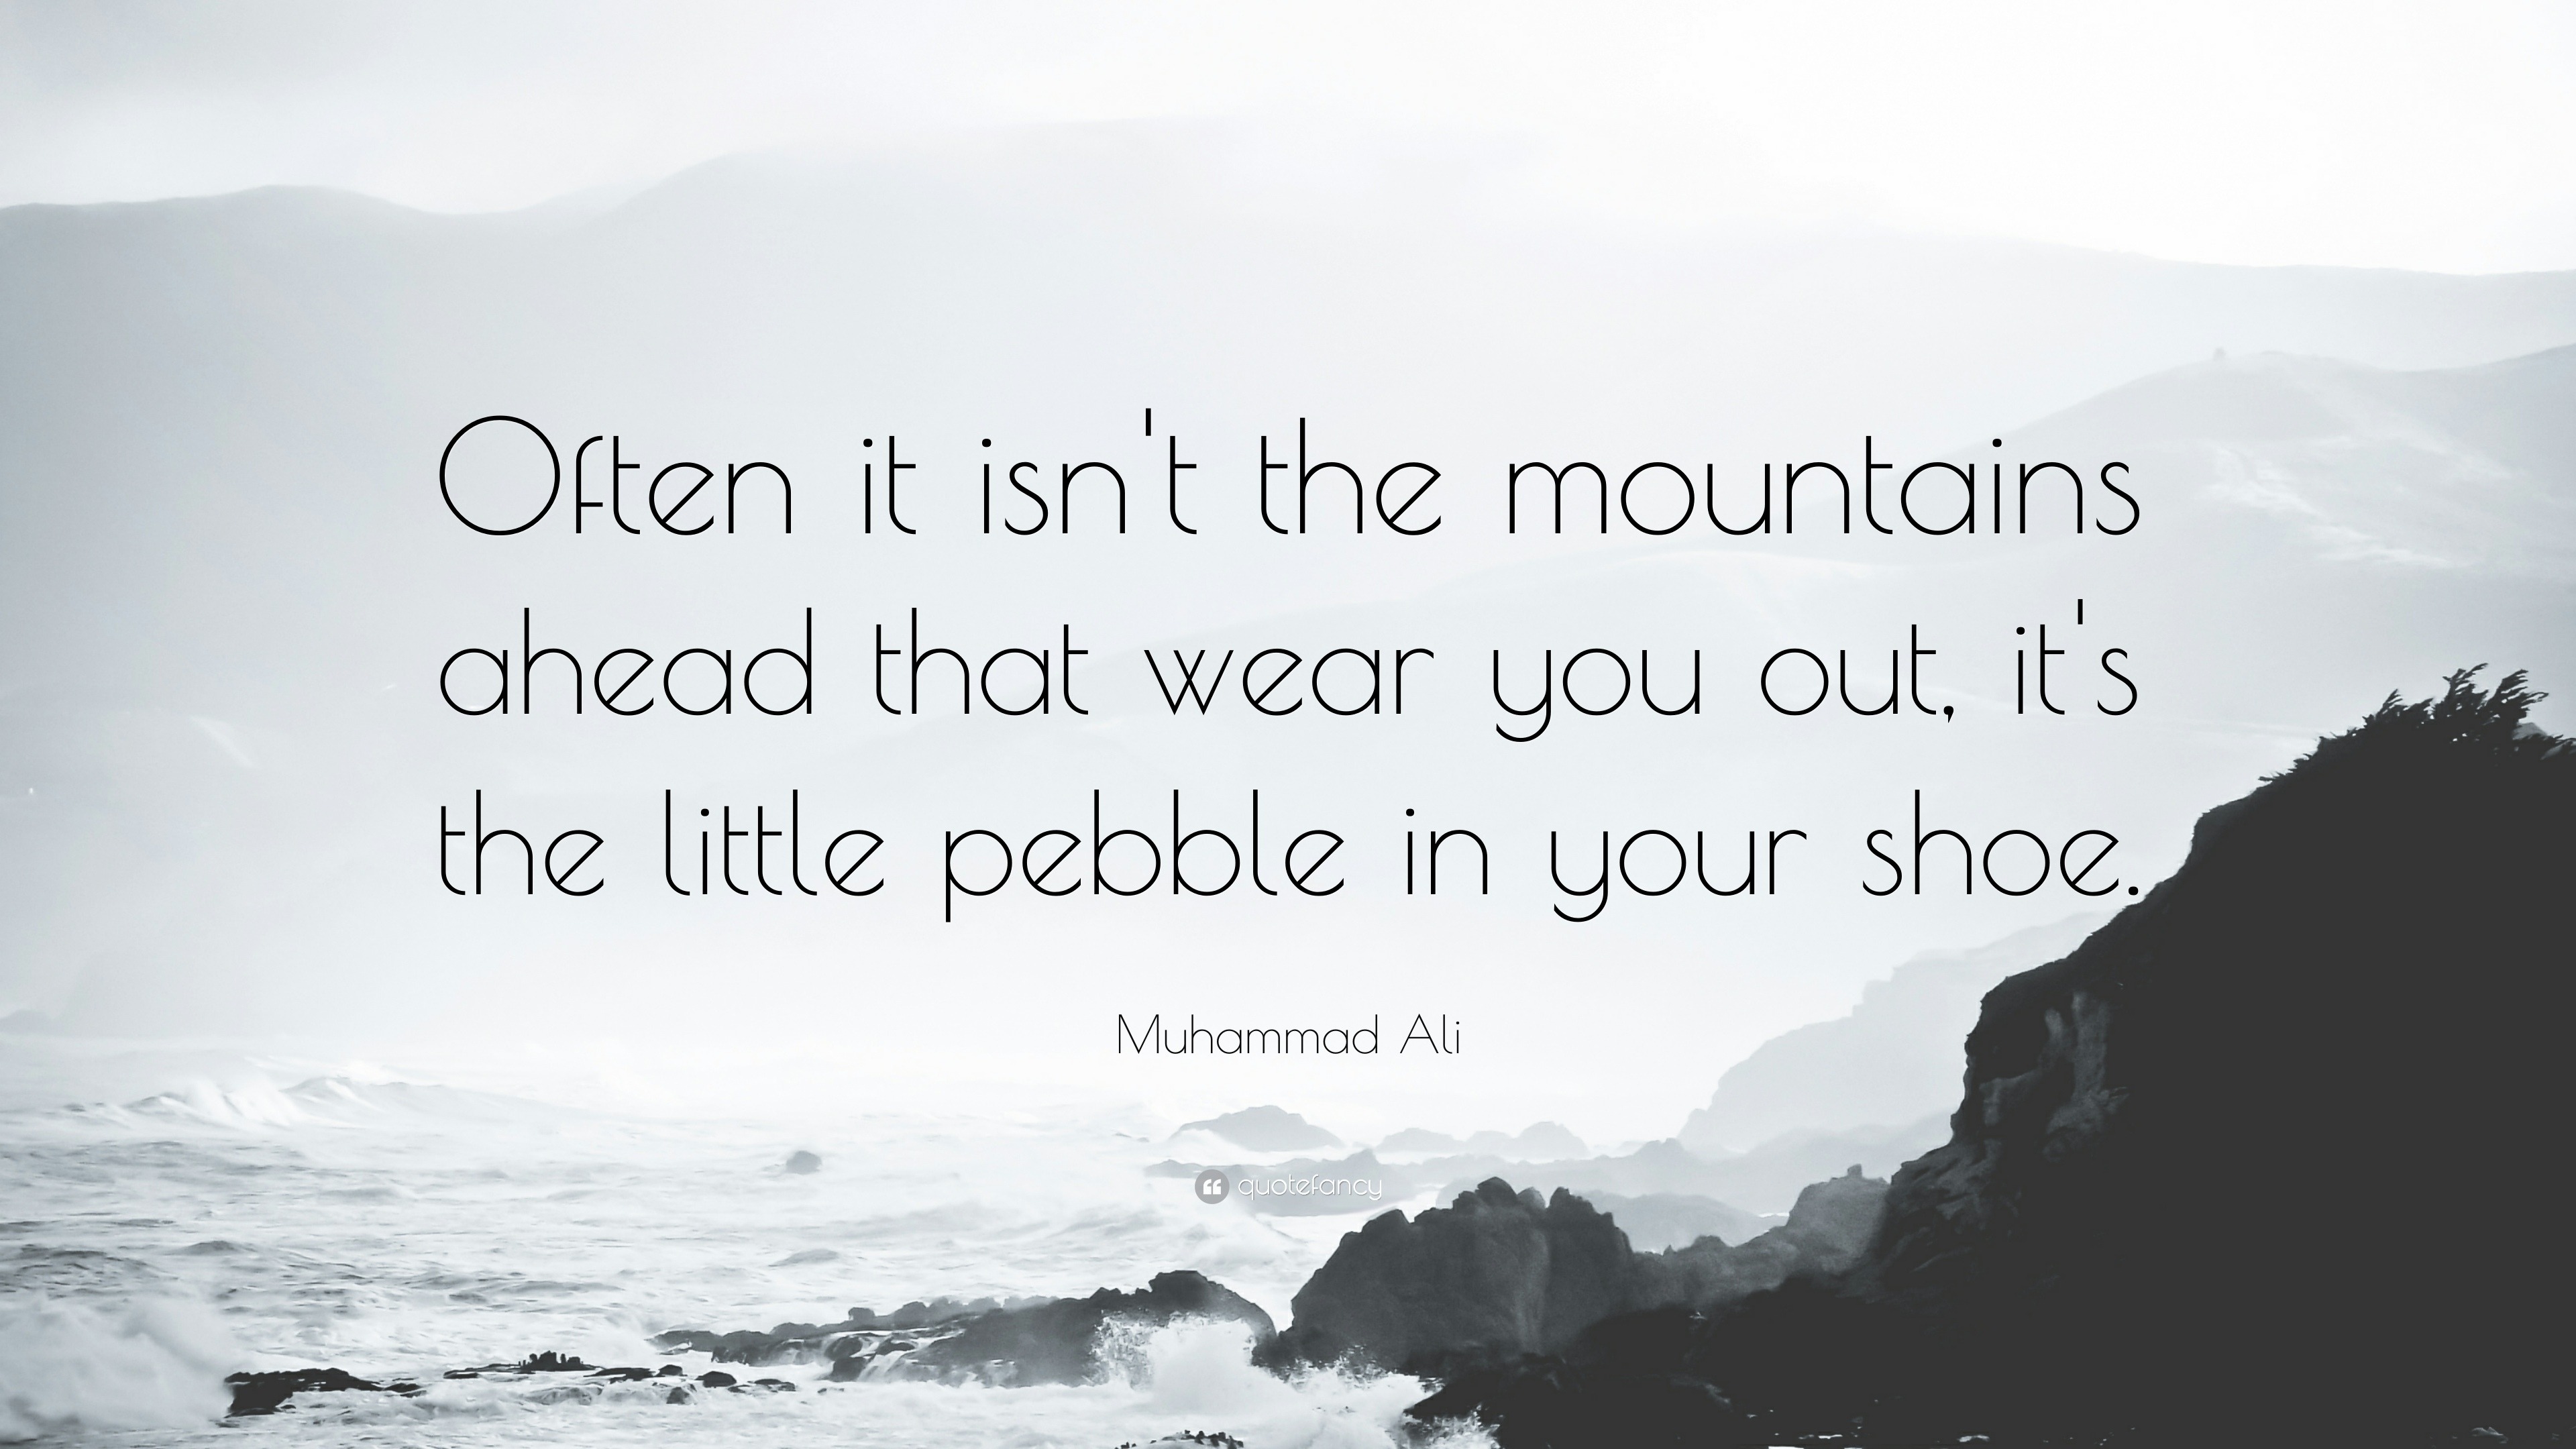 Muhammad Ali Quote: “Often it isn't the mountains ahead that wear you